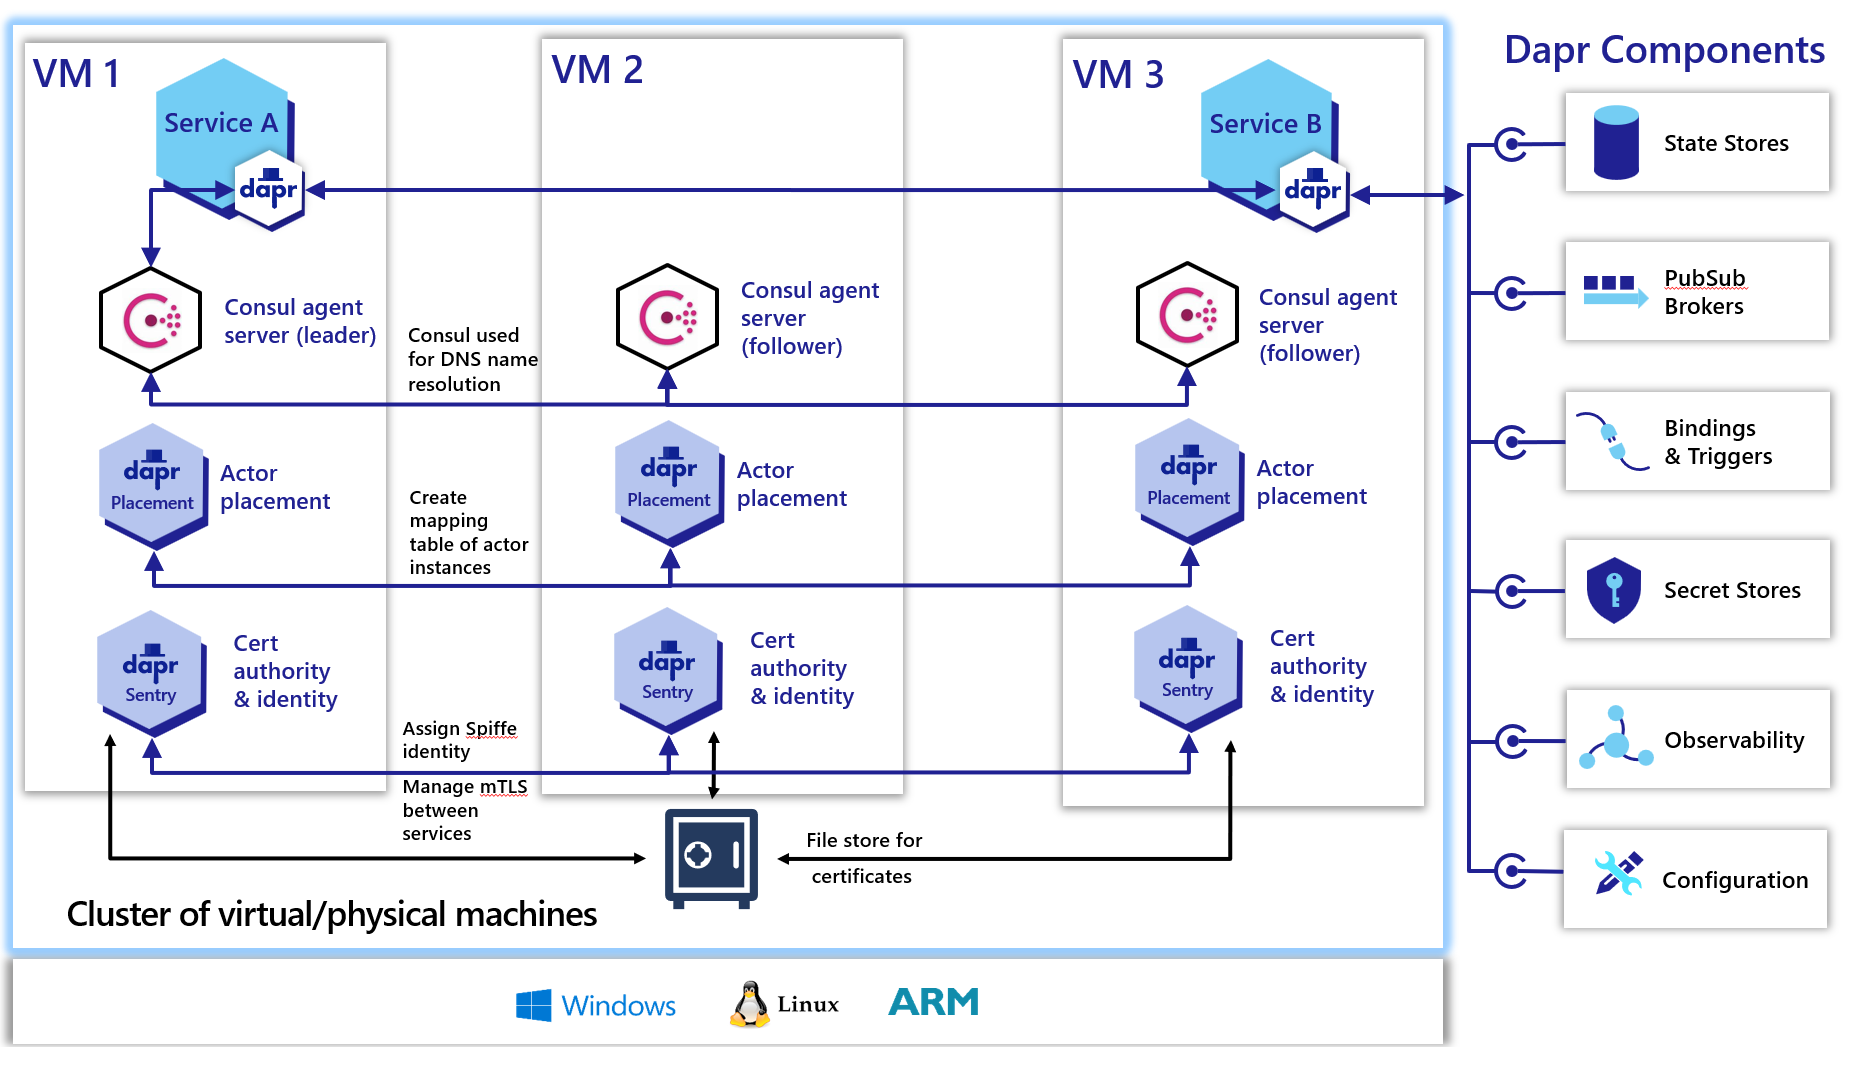 Architecture diagram of Dapr control plane and Consul deployed to VMs in high availability mode